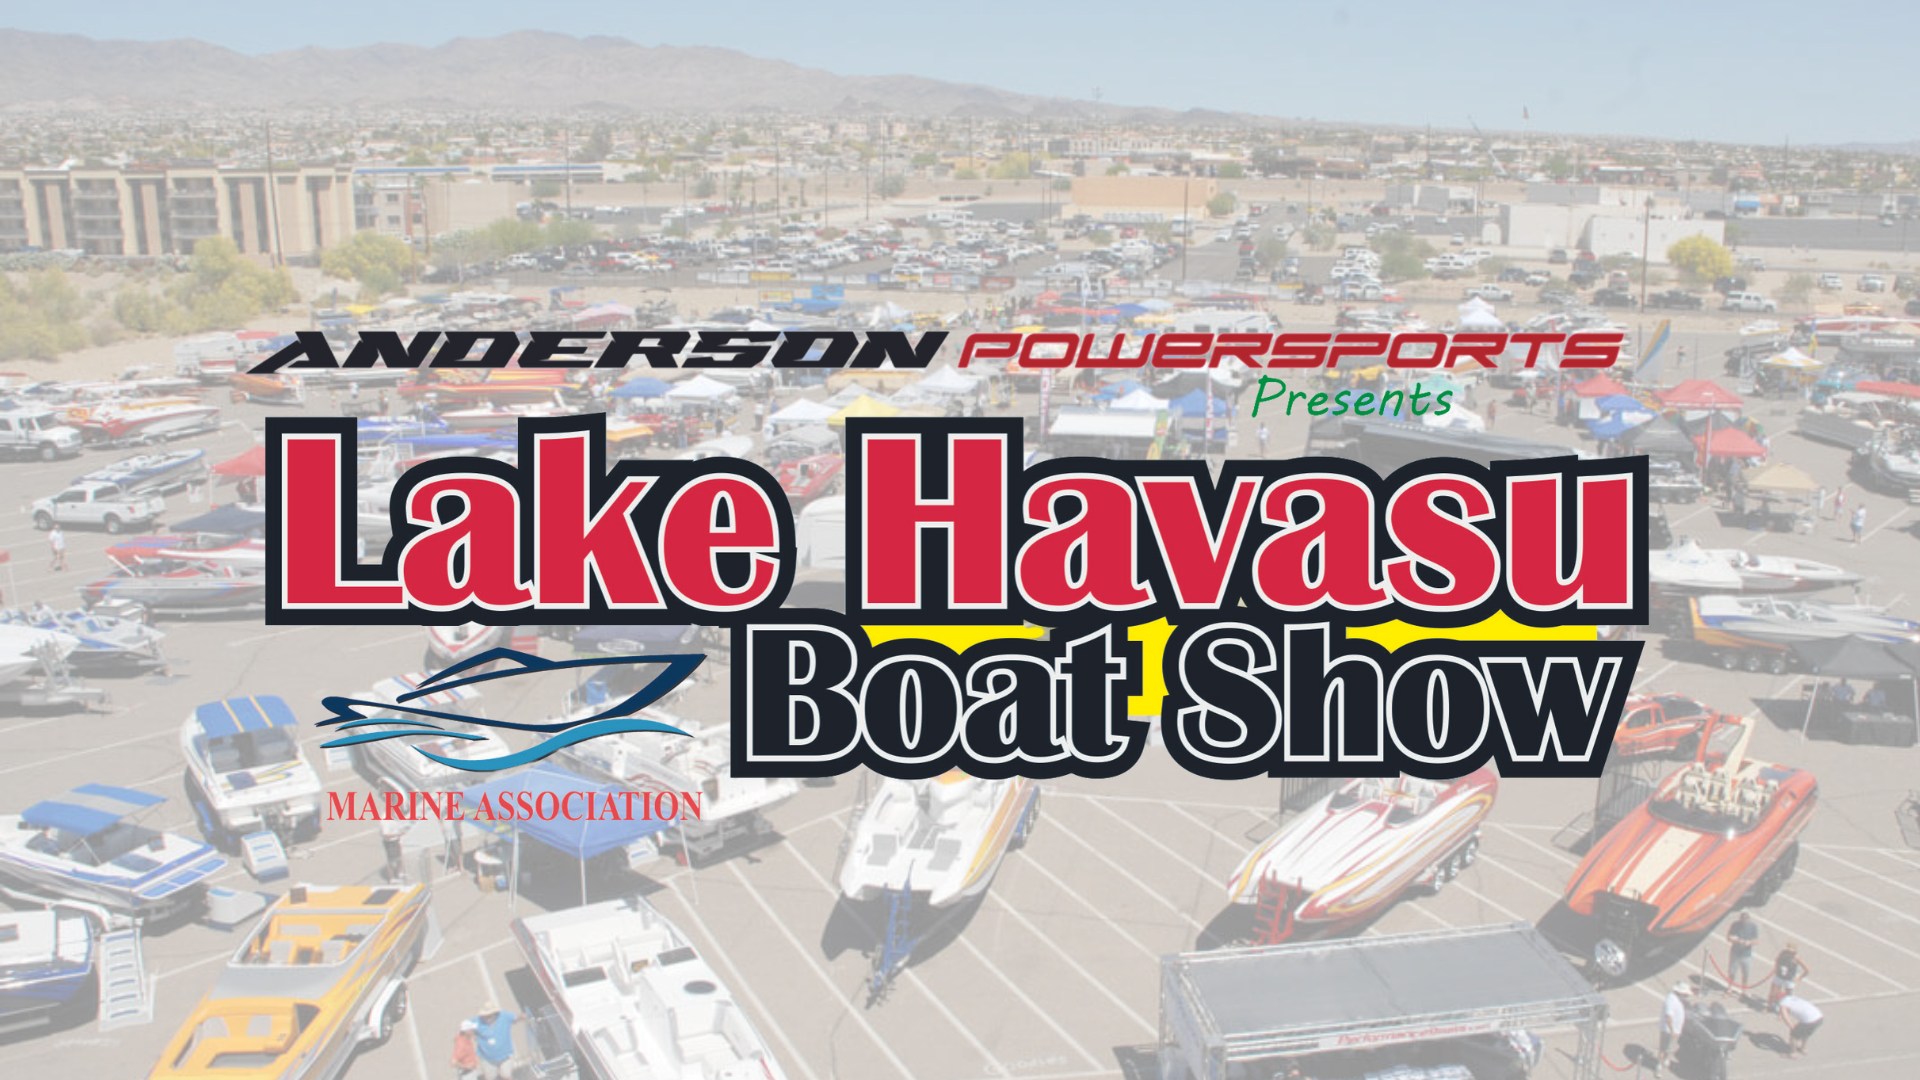 33rd Annual Boat Show